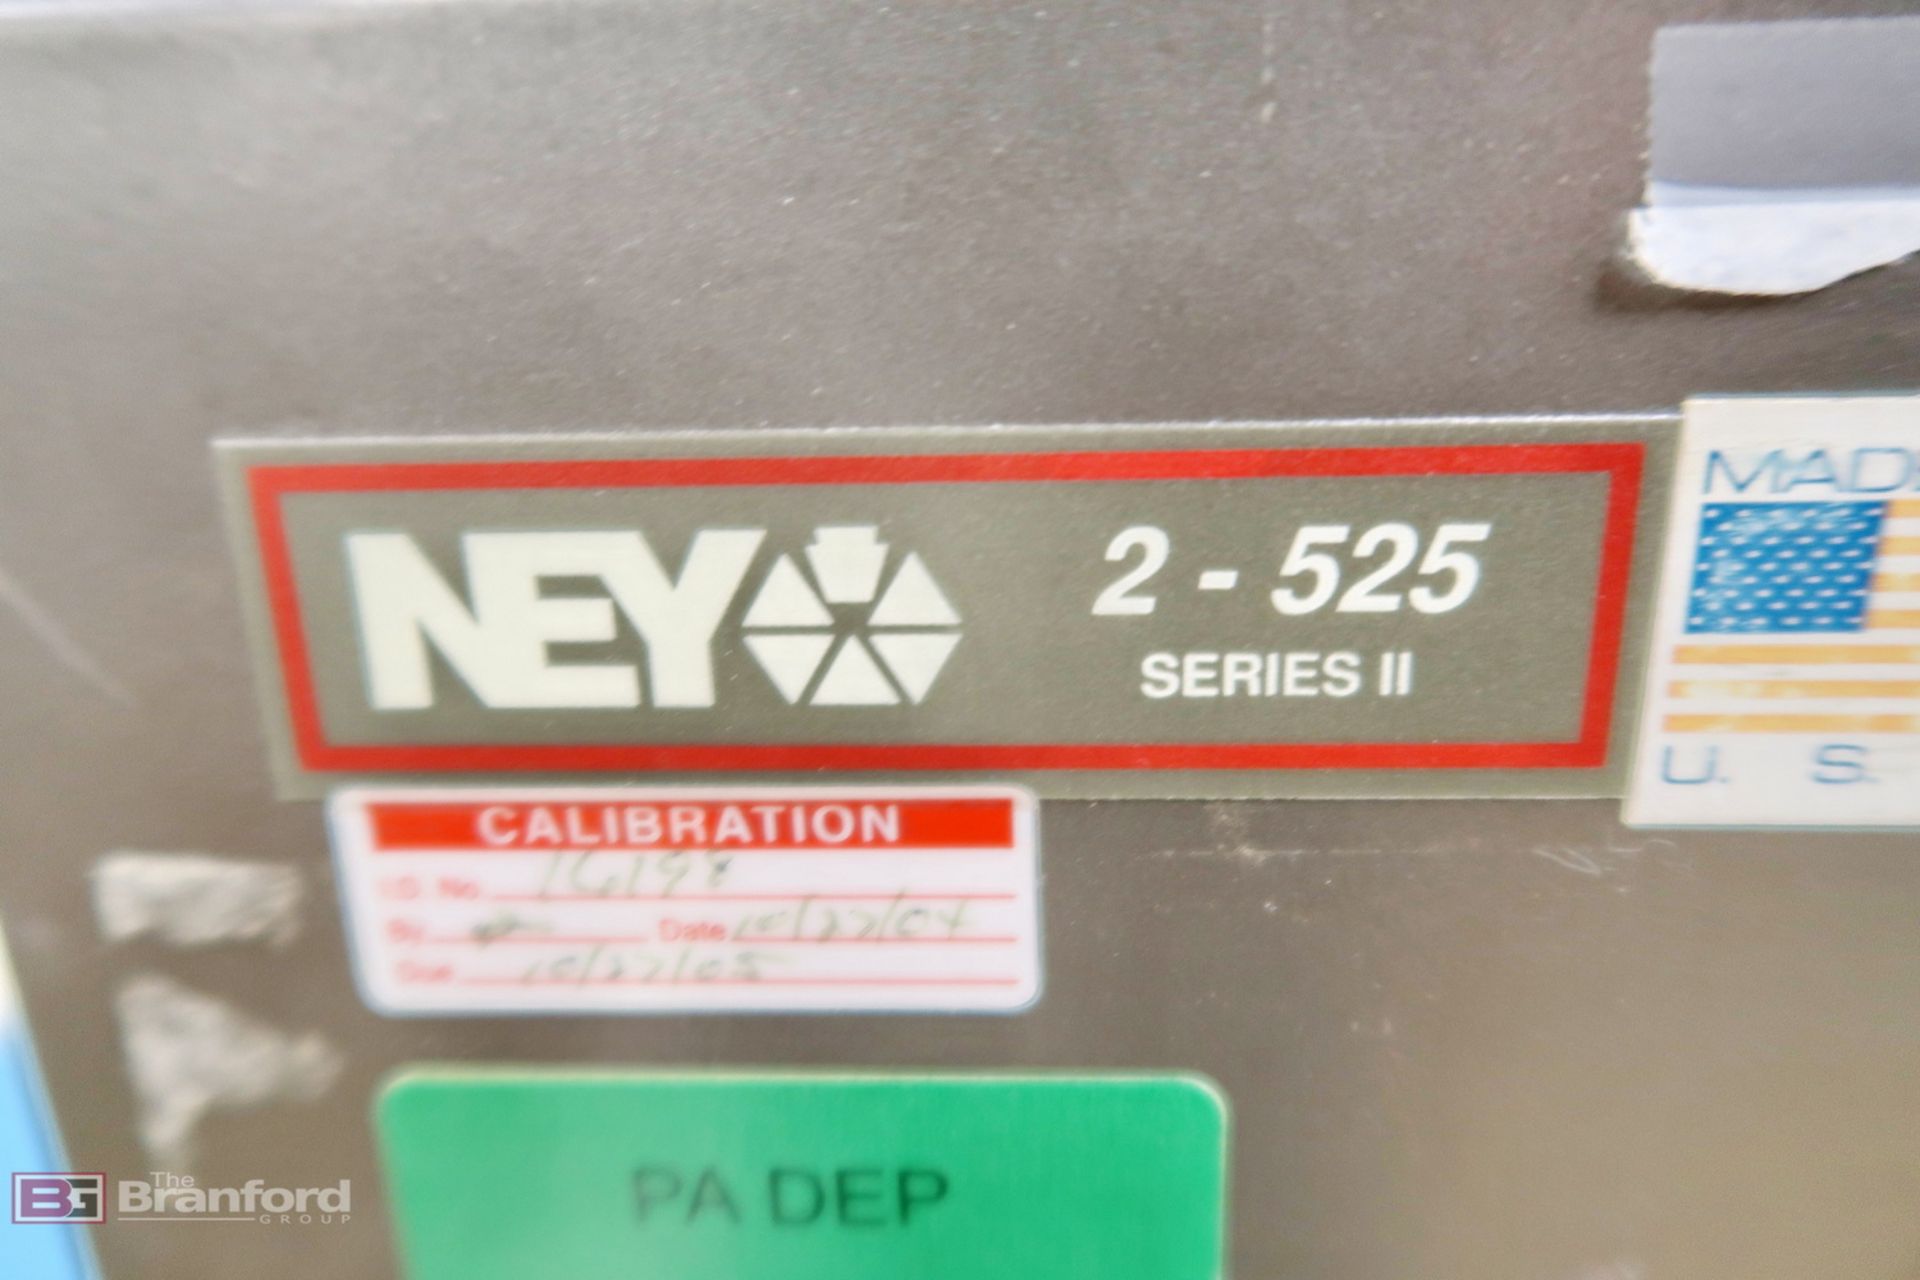 Ney oven model 2-525 series 2 - Image 4 of 5